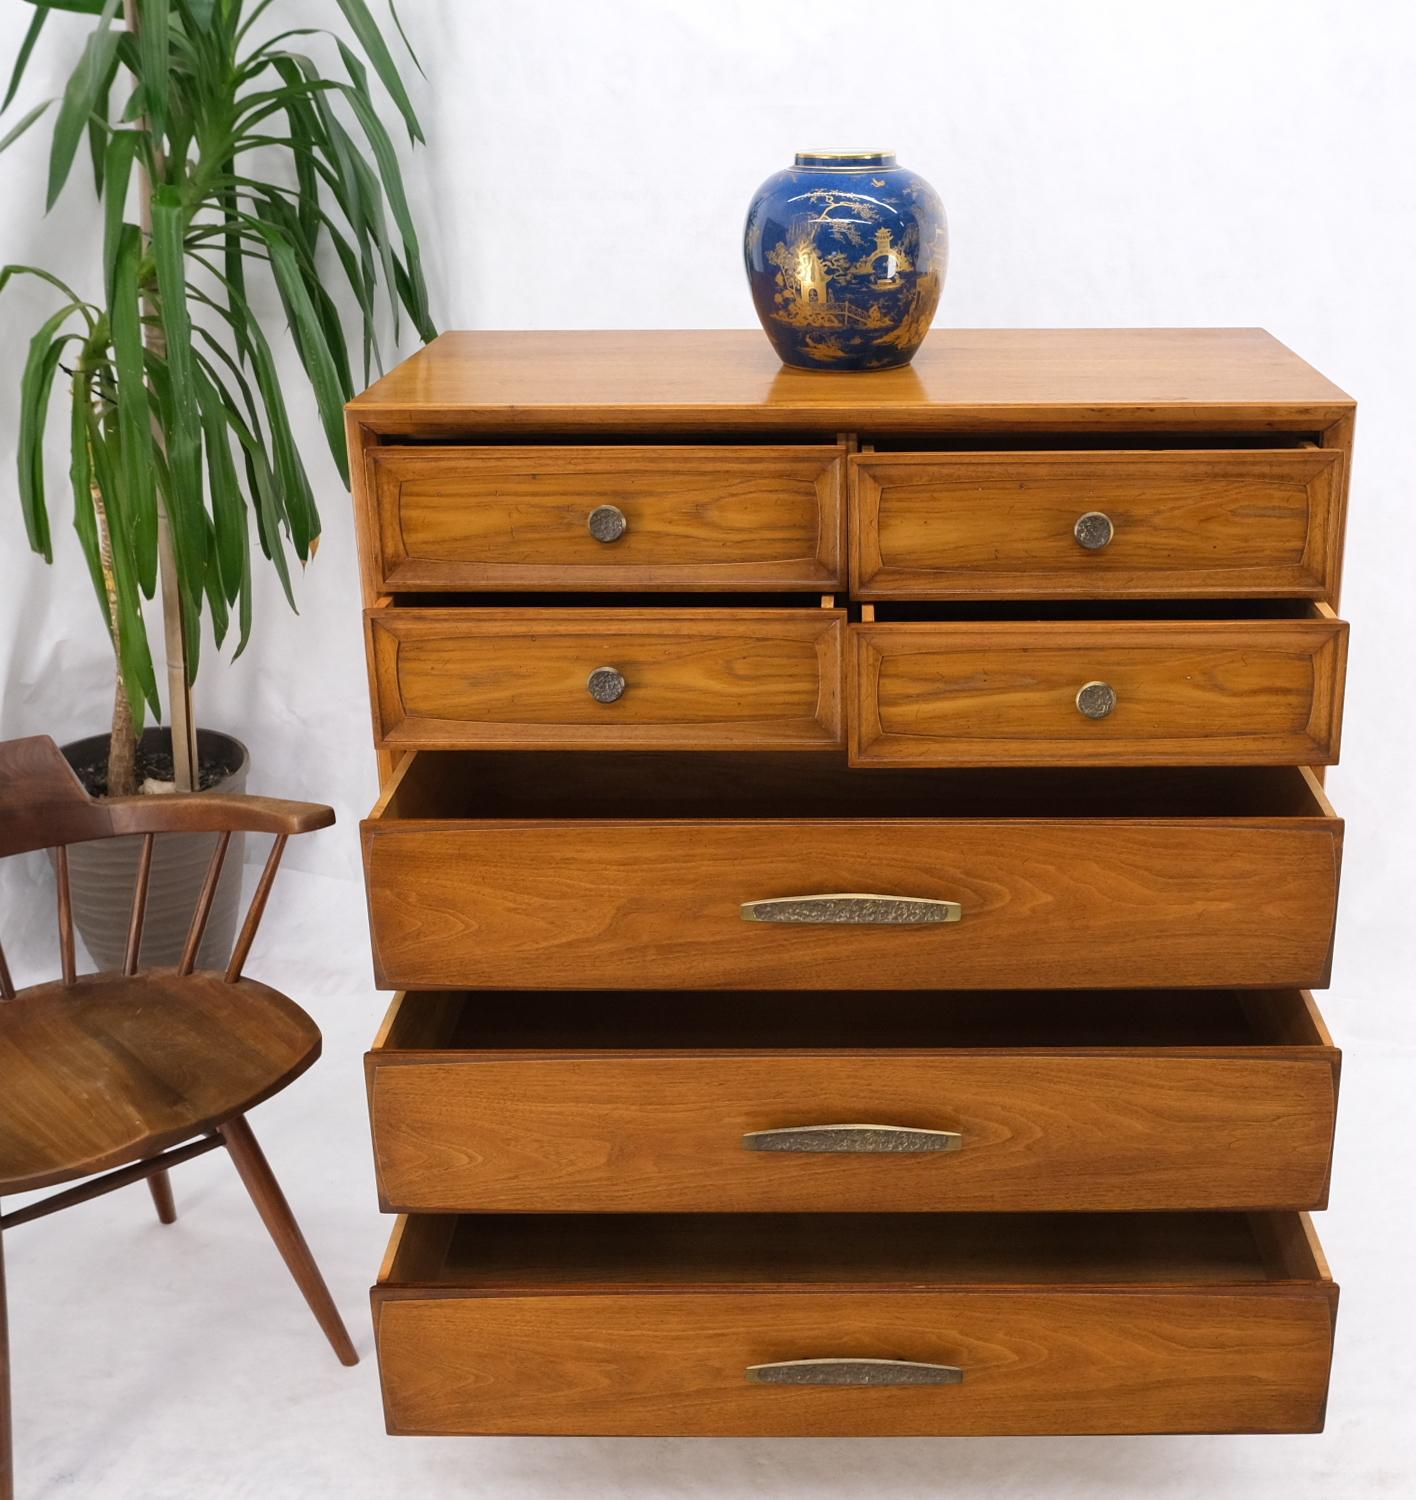 20th Century Light Walnut Hammered Brass Pulls 5 Drawer Chest of Drawers Dresser Mint For Sale